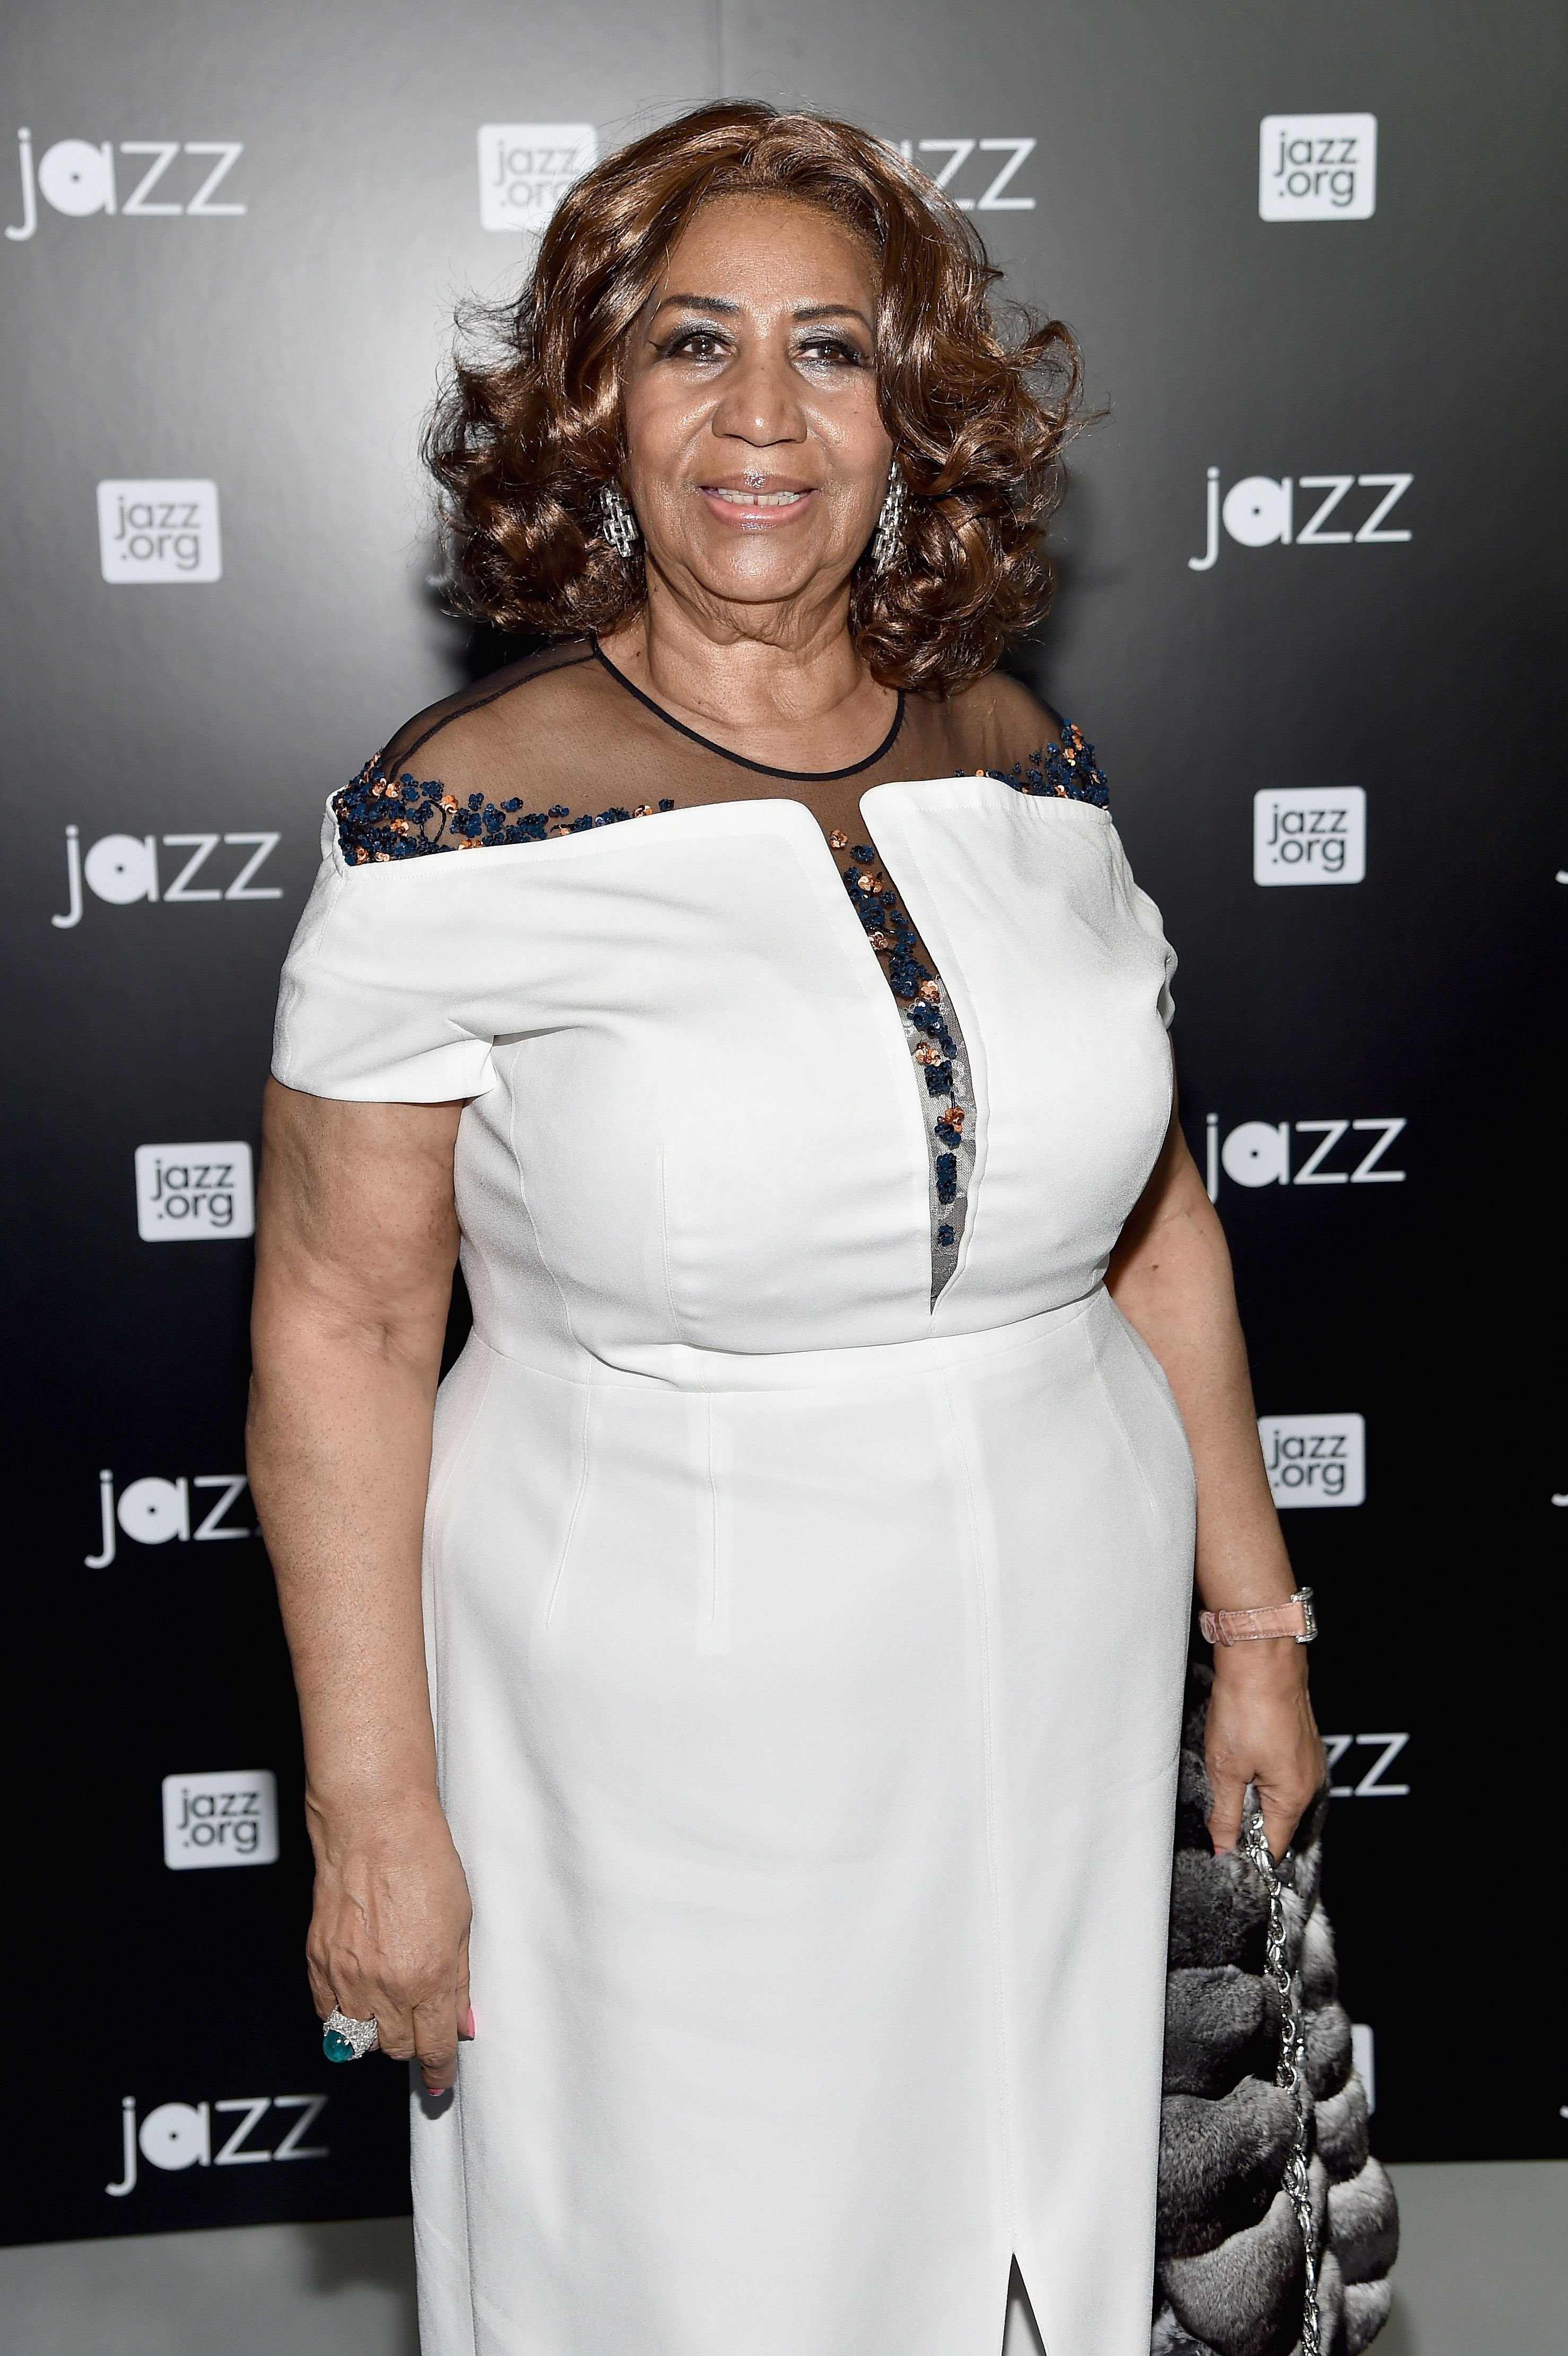 Late musician Aretha Franklin at the opening of the Mica and Ahmet Ertegun Atrium at Jazz at Lincoln Center on December 17, 2015 | Photo | Getty Images